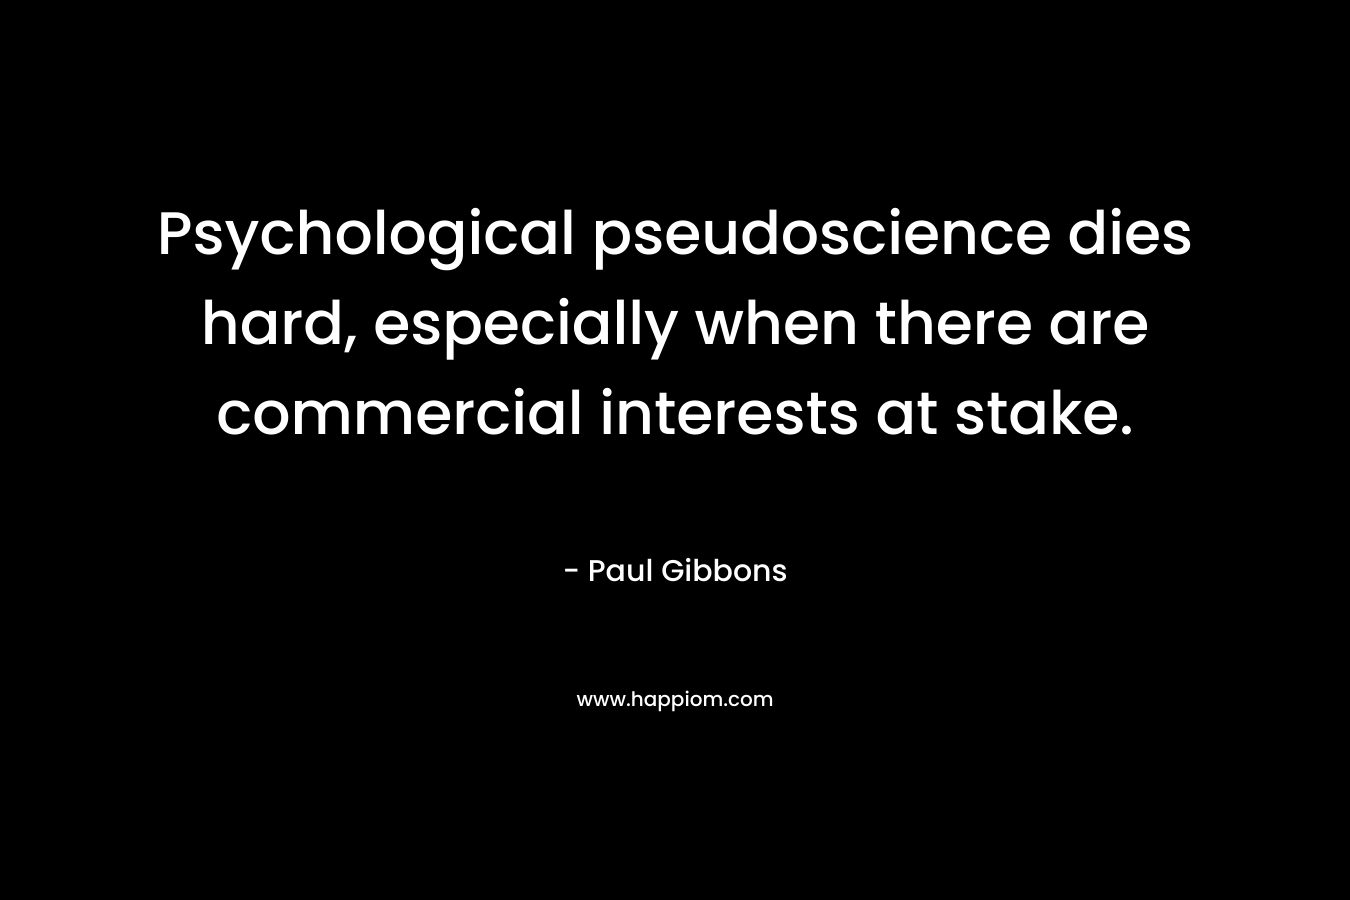 Psychological pseudoscience dies hard, especially when there are commercial interests at stake.